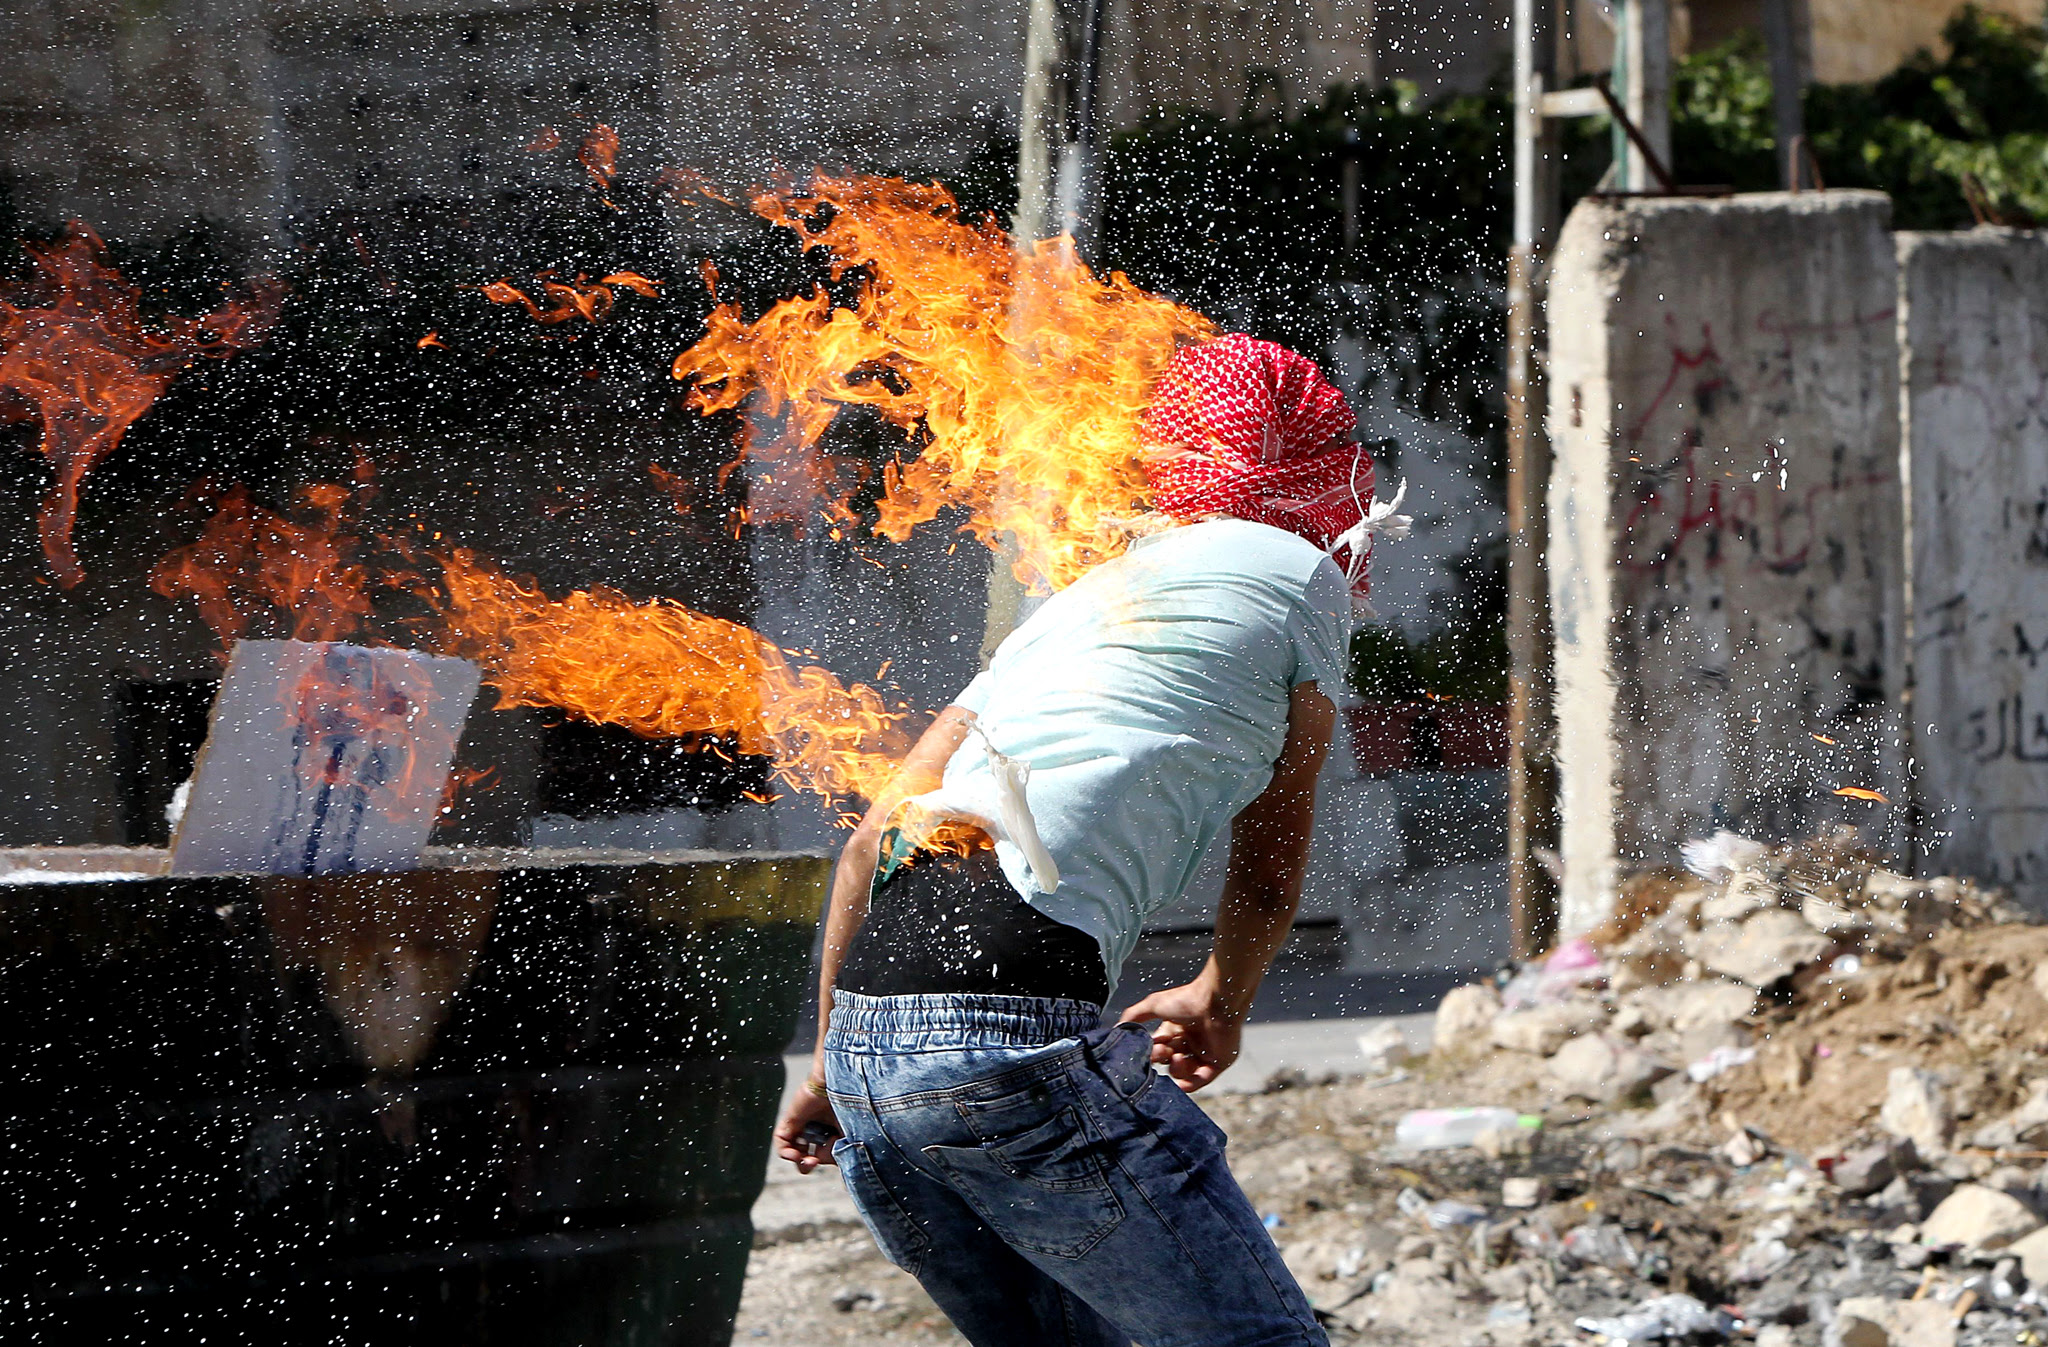 The clothes of a Palestinian student from Hebron University burn after he set himself on fire while throwing a Molotov cocktail towards Israeli soldiers and border police during clashes after the protesters blocked the main north entrance of the West Bank town of Hebron with stones and tyres on October 13, 2015. The rising tide of unrest, which has seen a series of stabbing attacks and violent protests, has raised fears that a full-scale third Palestinian uprising, or intifada, could erupt. AFP PHOTO / HAZEM BADERHAZEM BADER/AFP/Getty Images